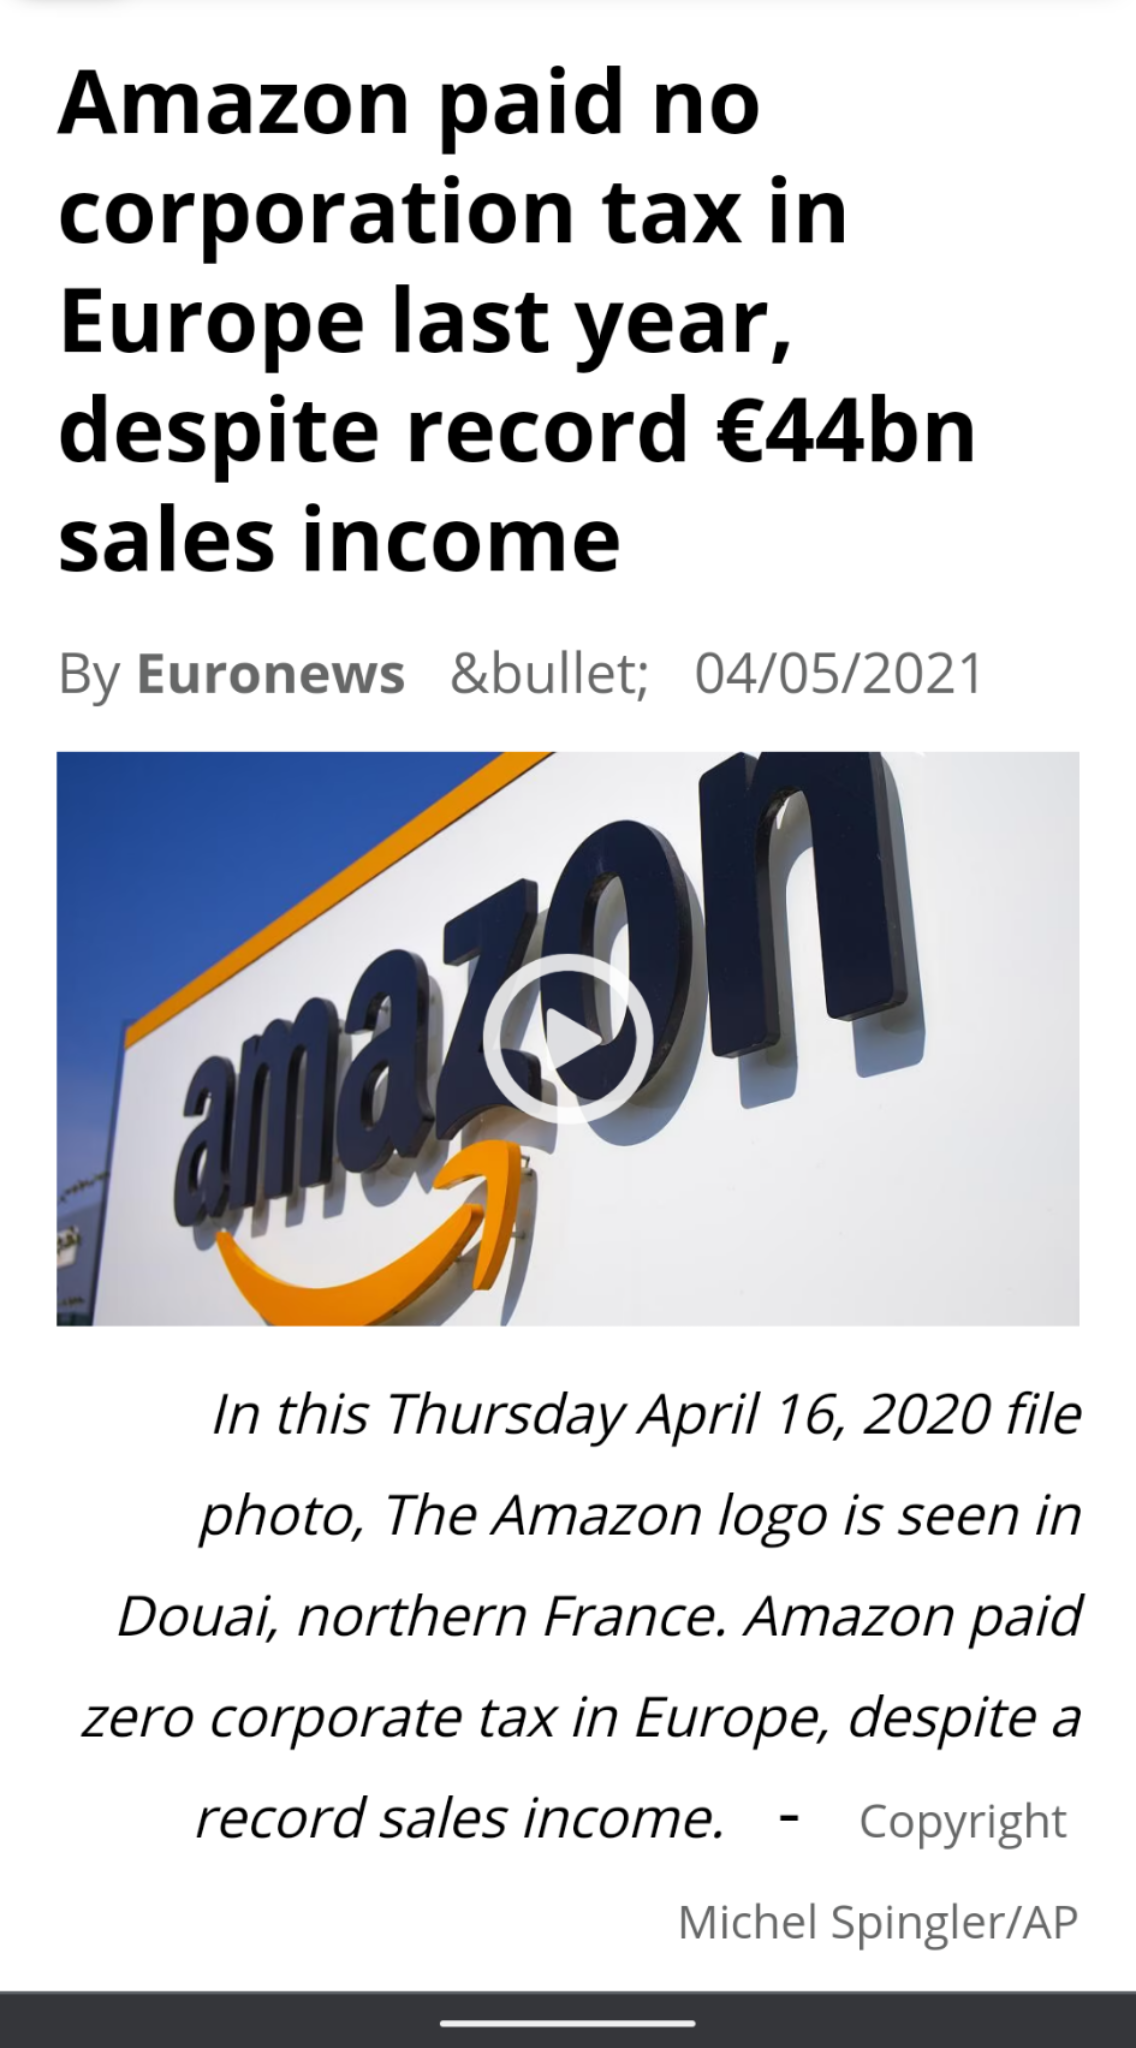 Please support your local businesses. Amazon are corrupt and theives.